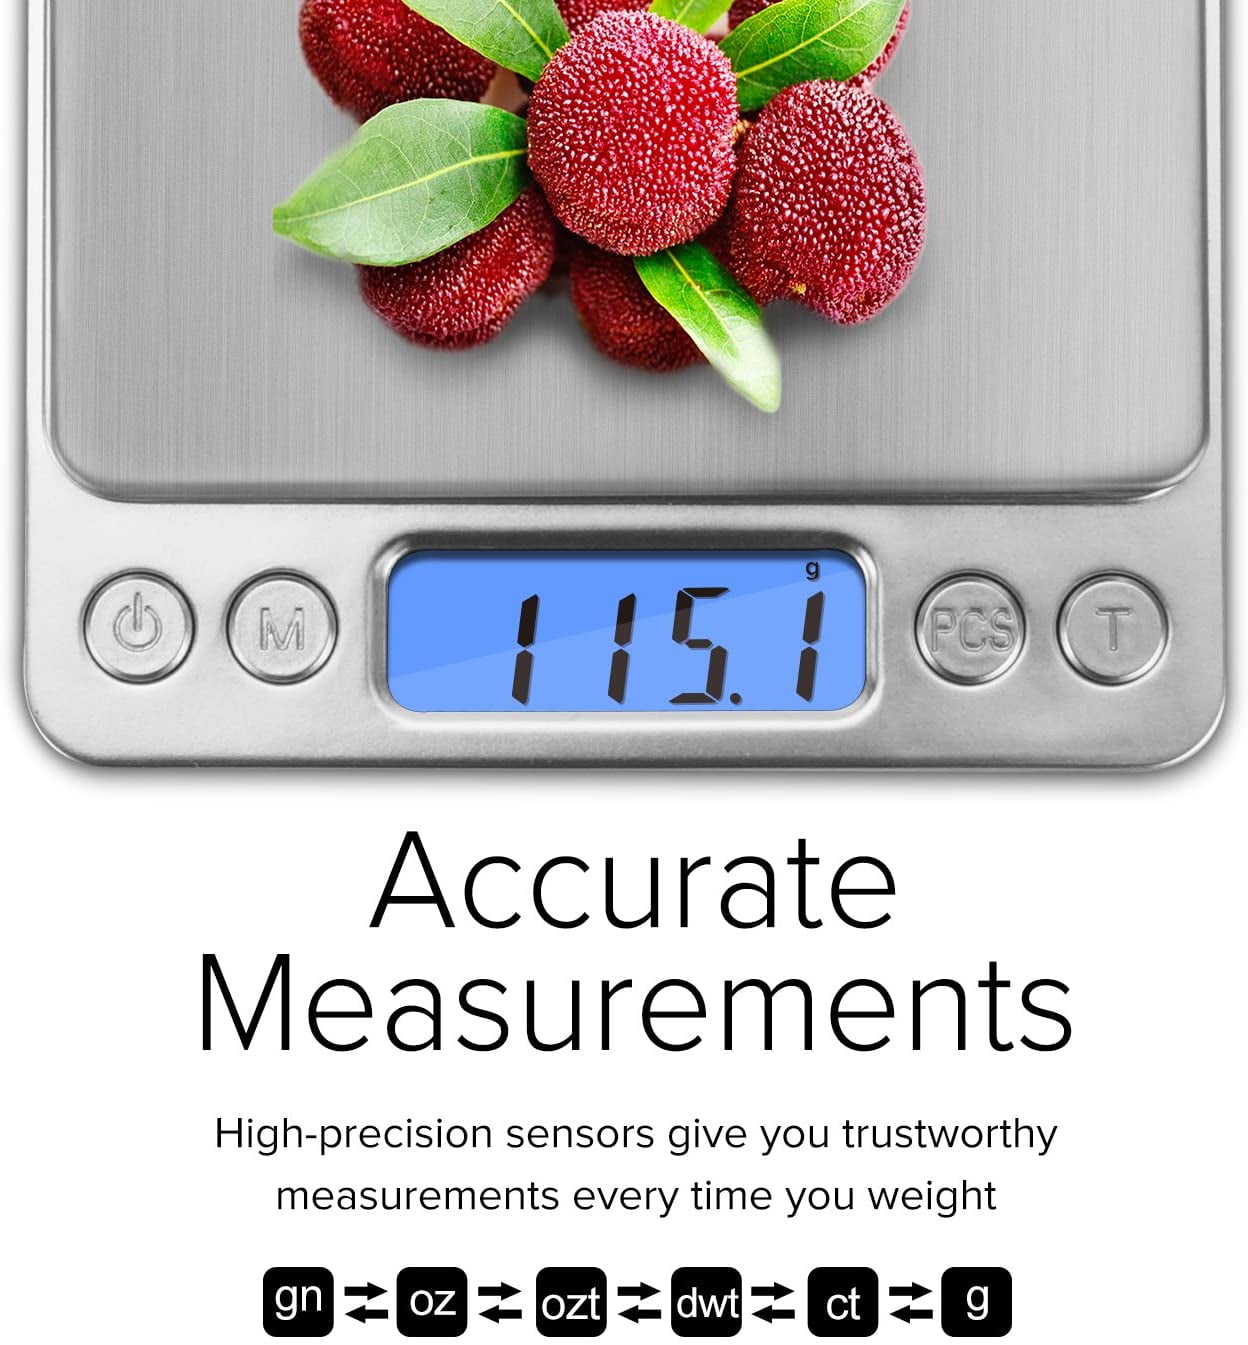 GRAM PRES Food Kitchen Scale Digital Weight Grams and Oz with IPX6